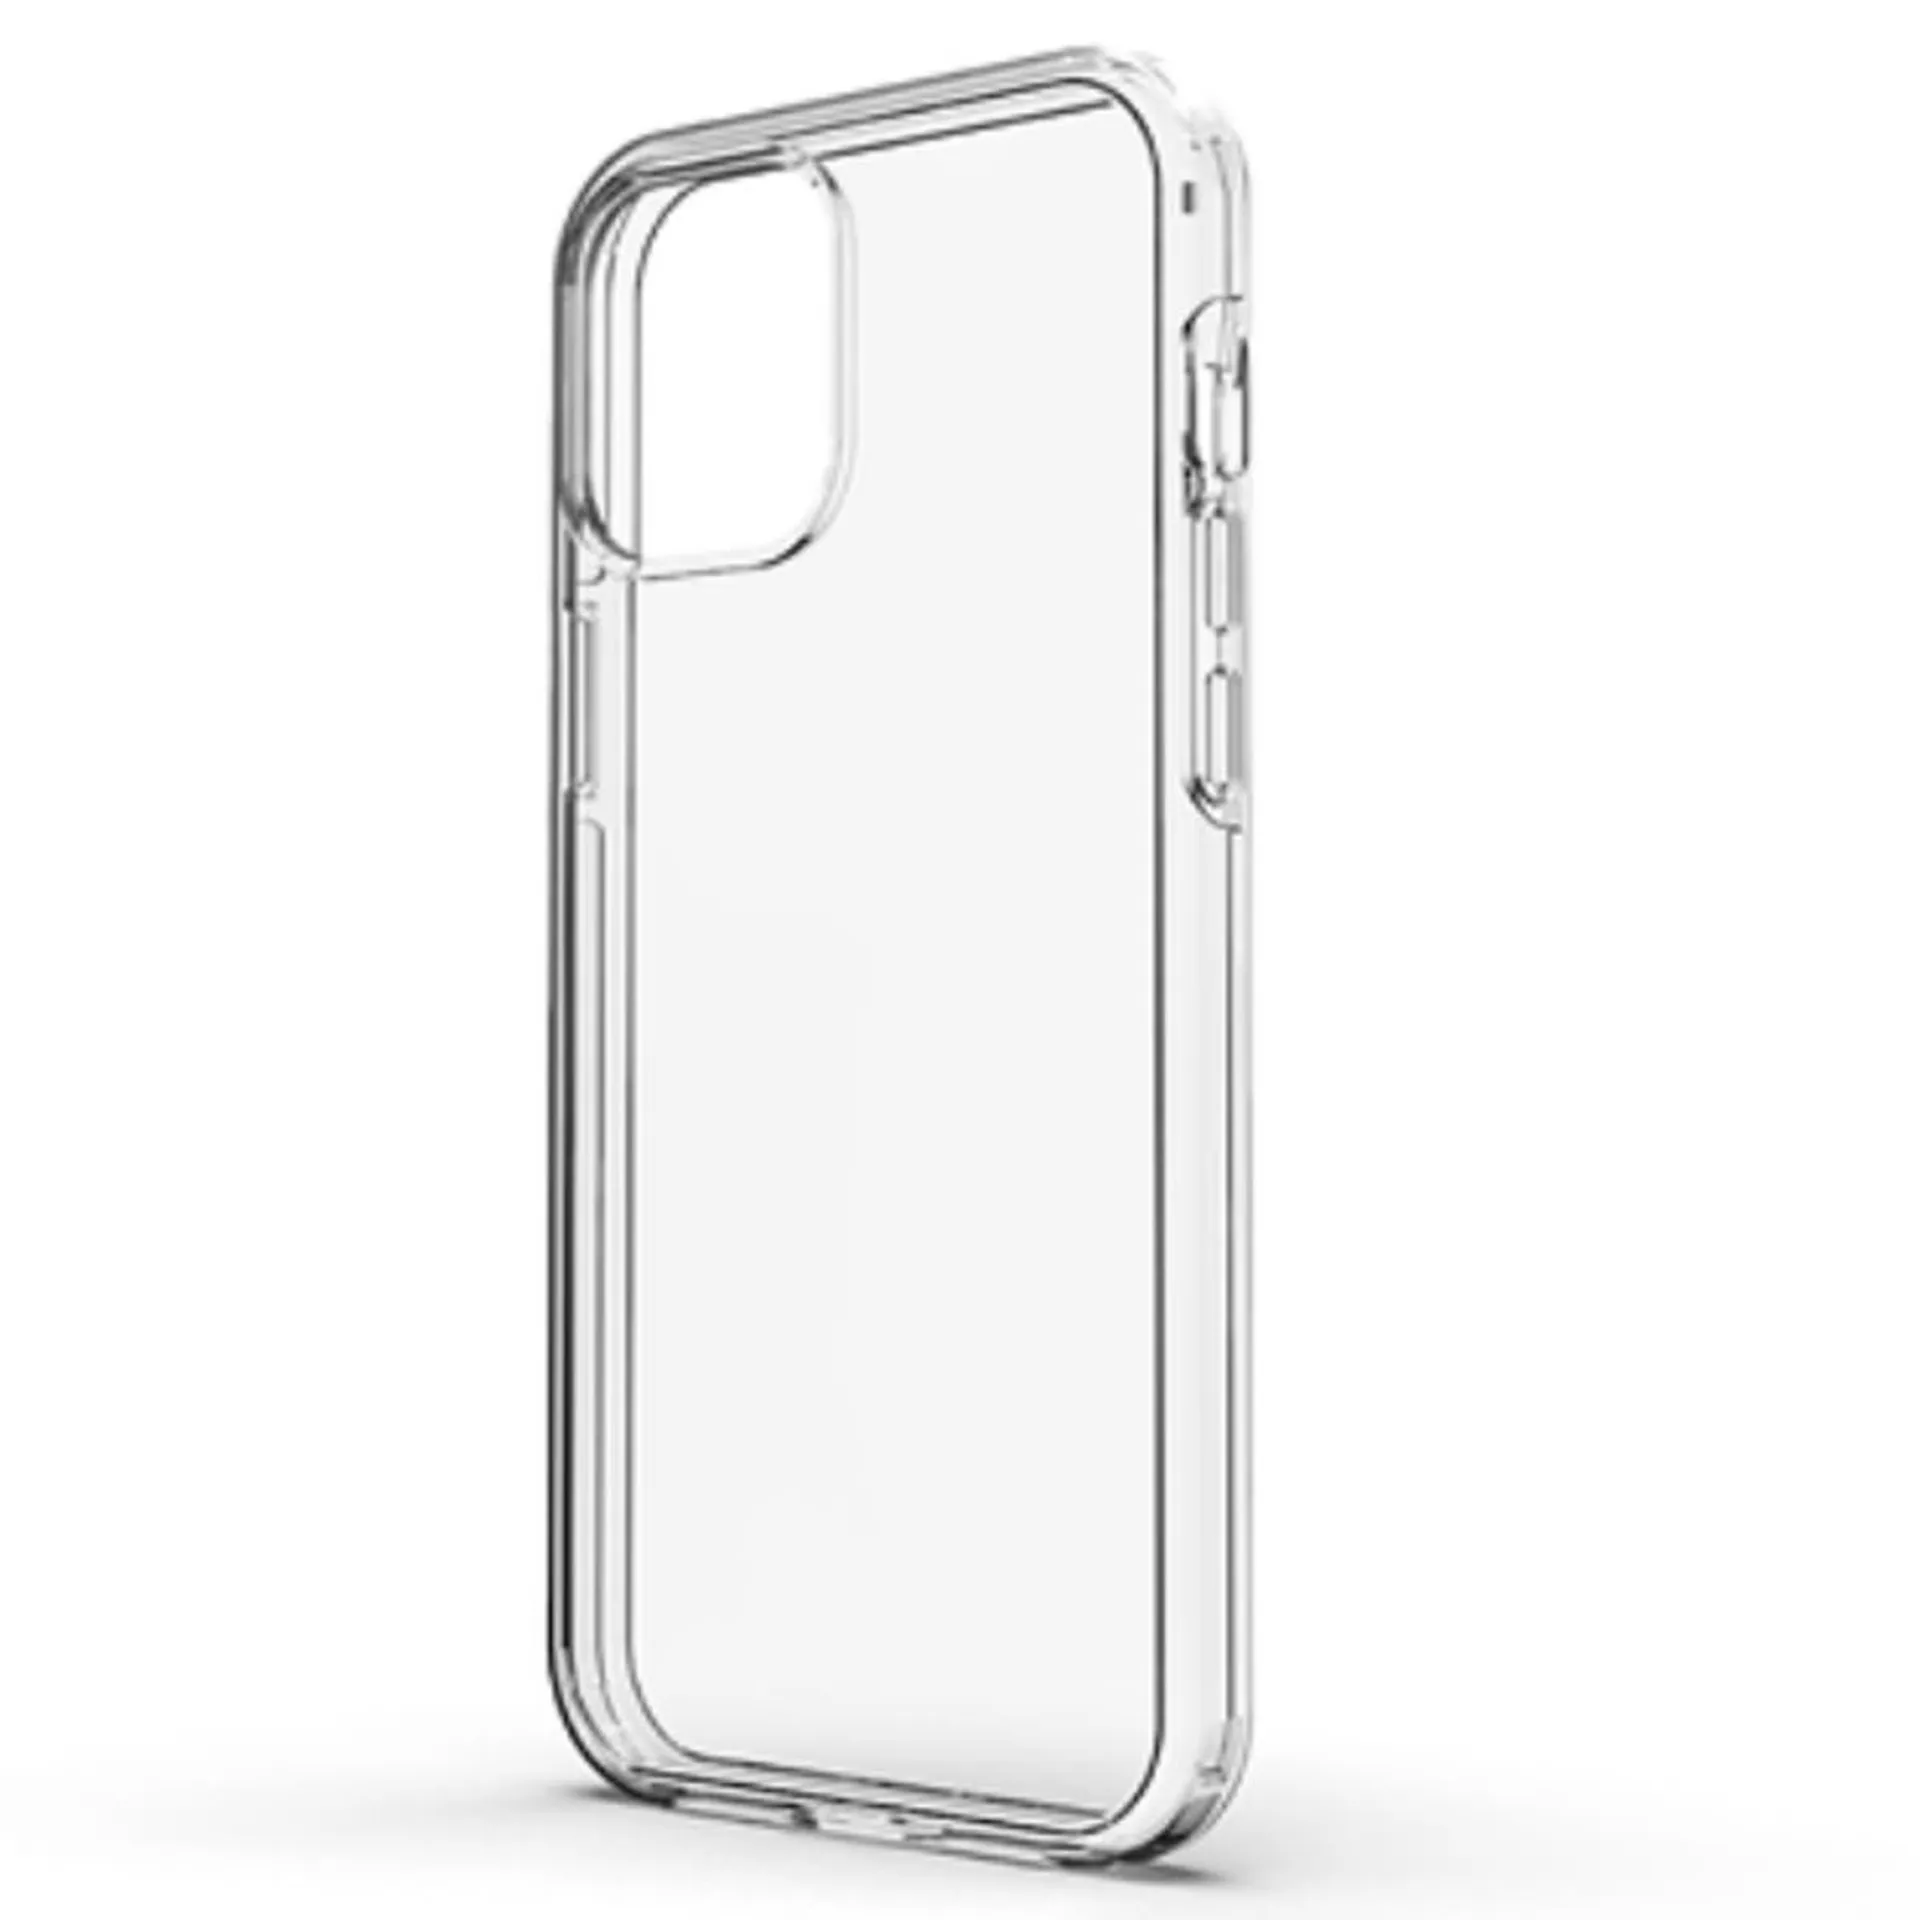 Moov Drop Protection Case for iPhone 12 Pro Max - Clear